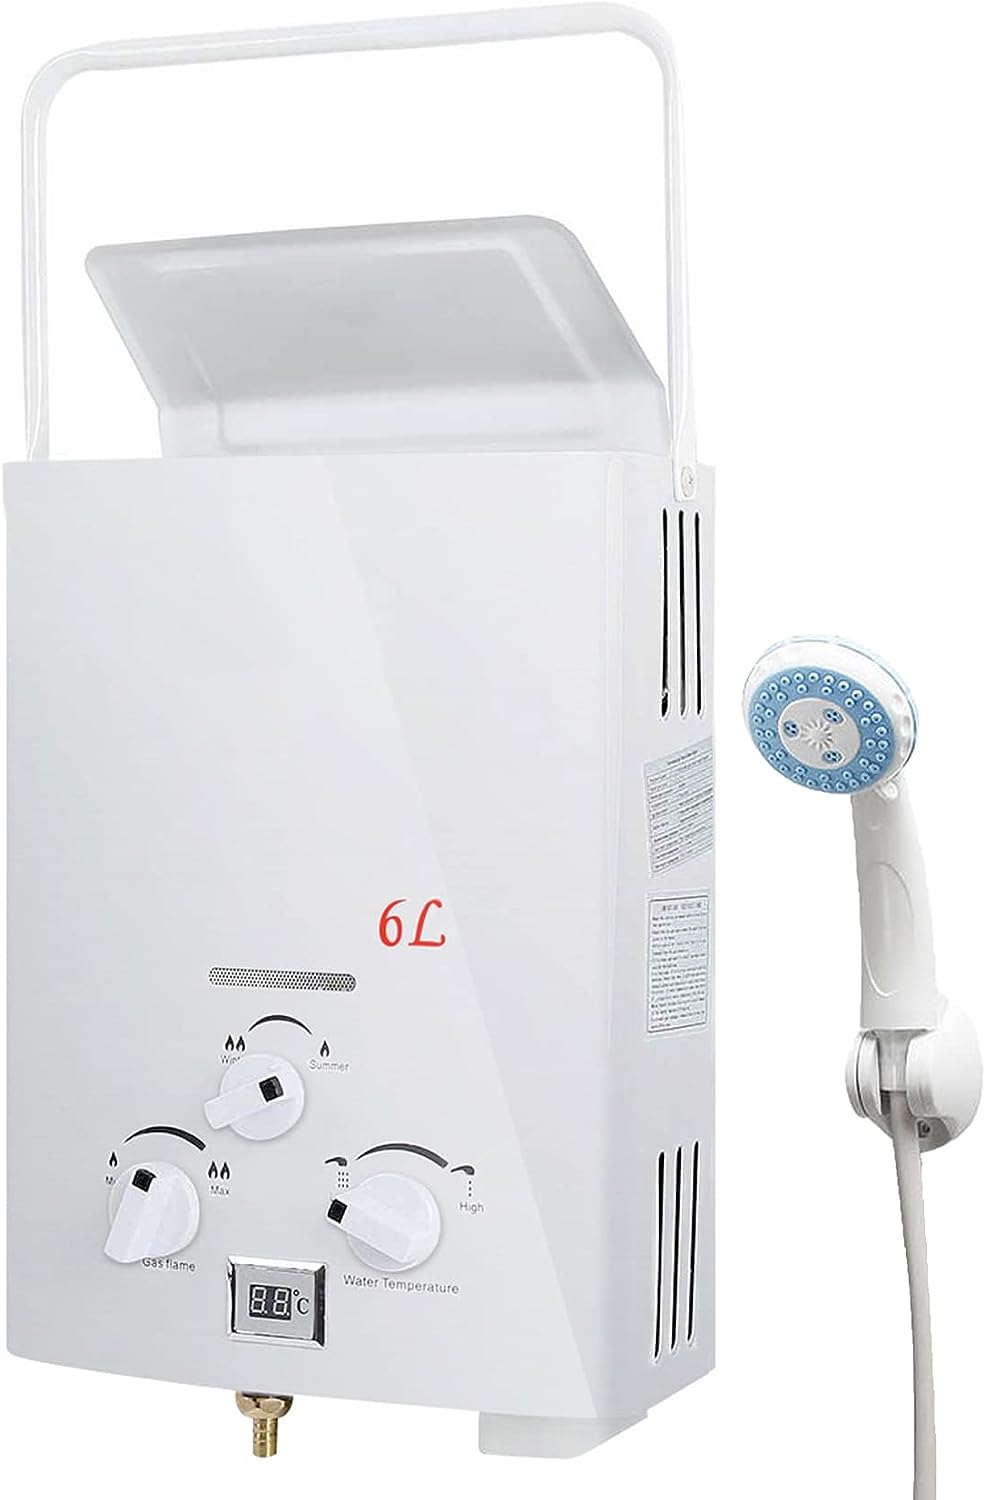 TCFUNDY 1.58 GPM Tankless Water Heater Propane Gas 6L, [...]